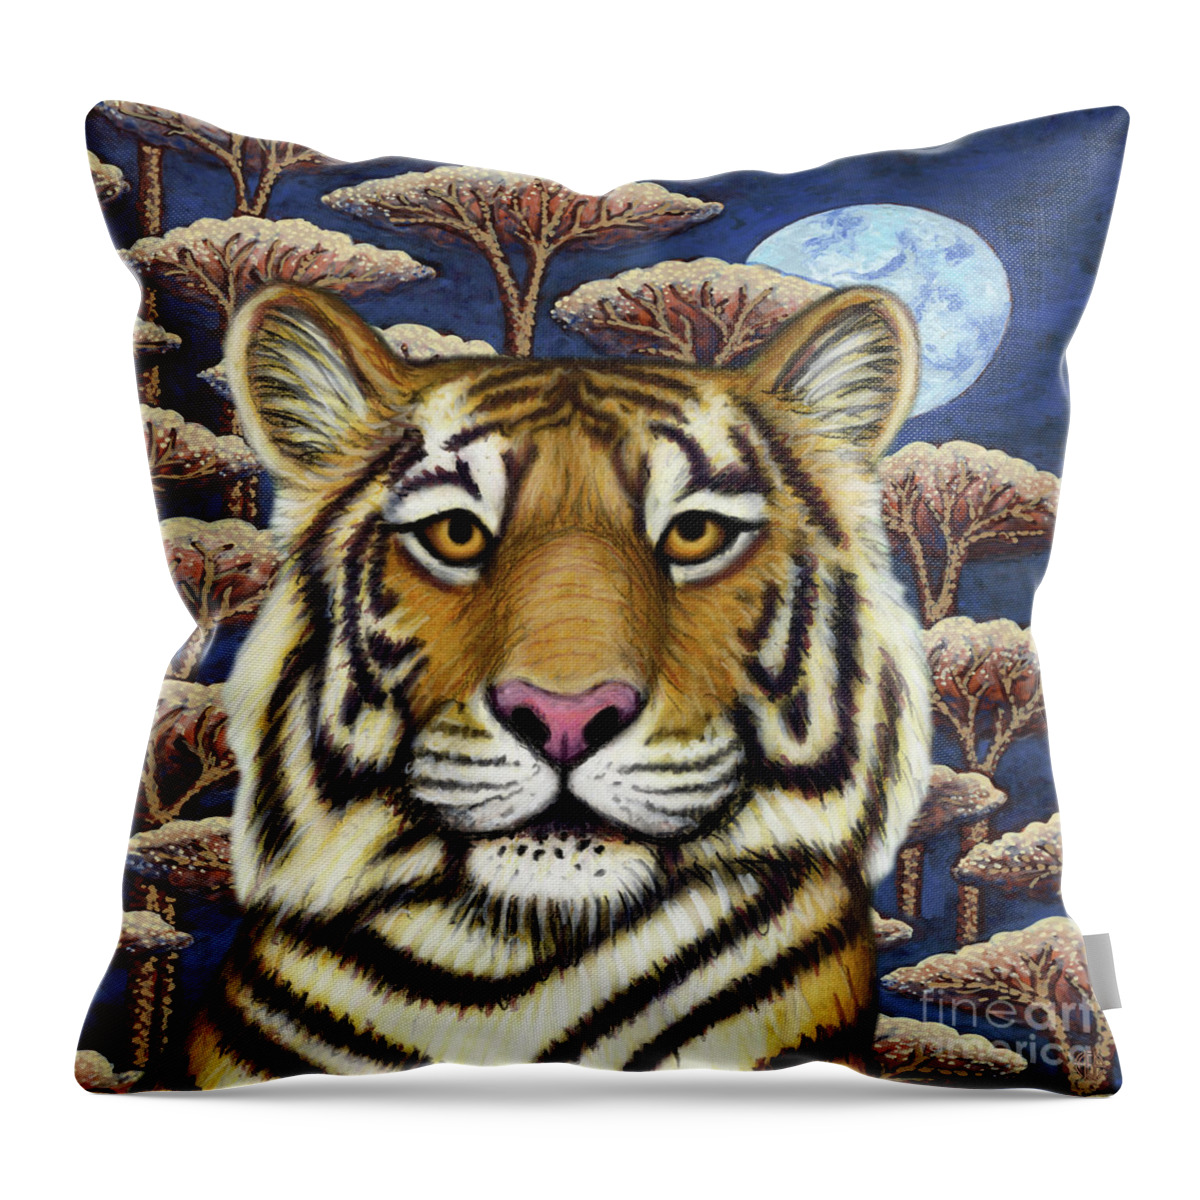 Tiger Throw Pillow featuring the painting Siberian Tiger Moon by Amy E Fraser